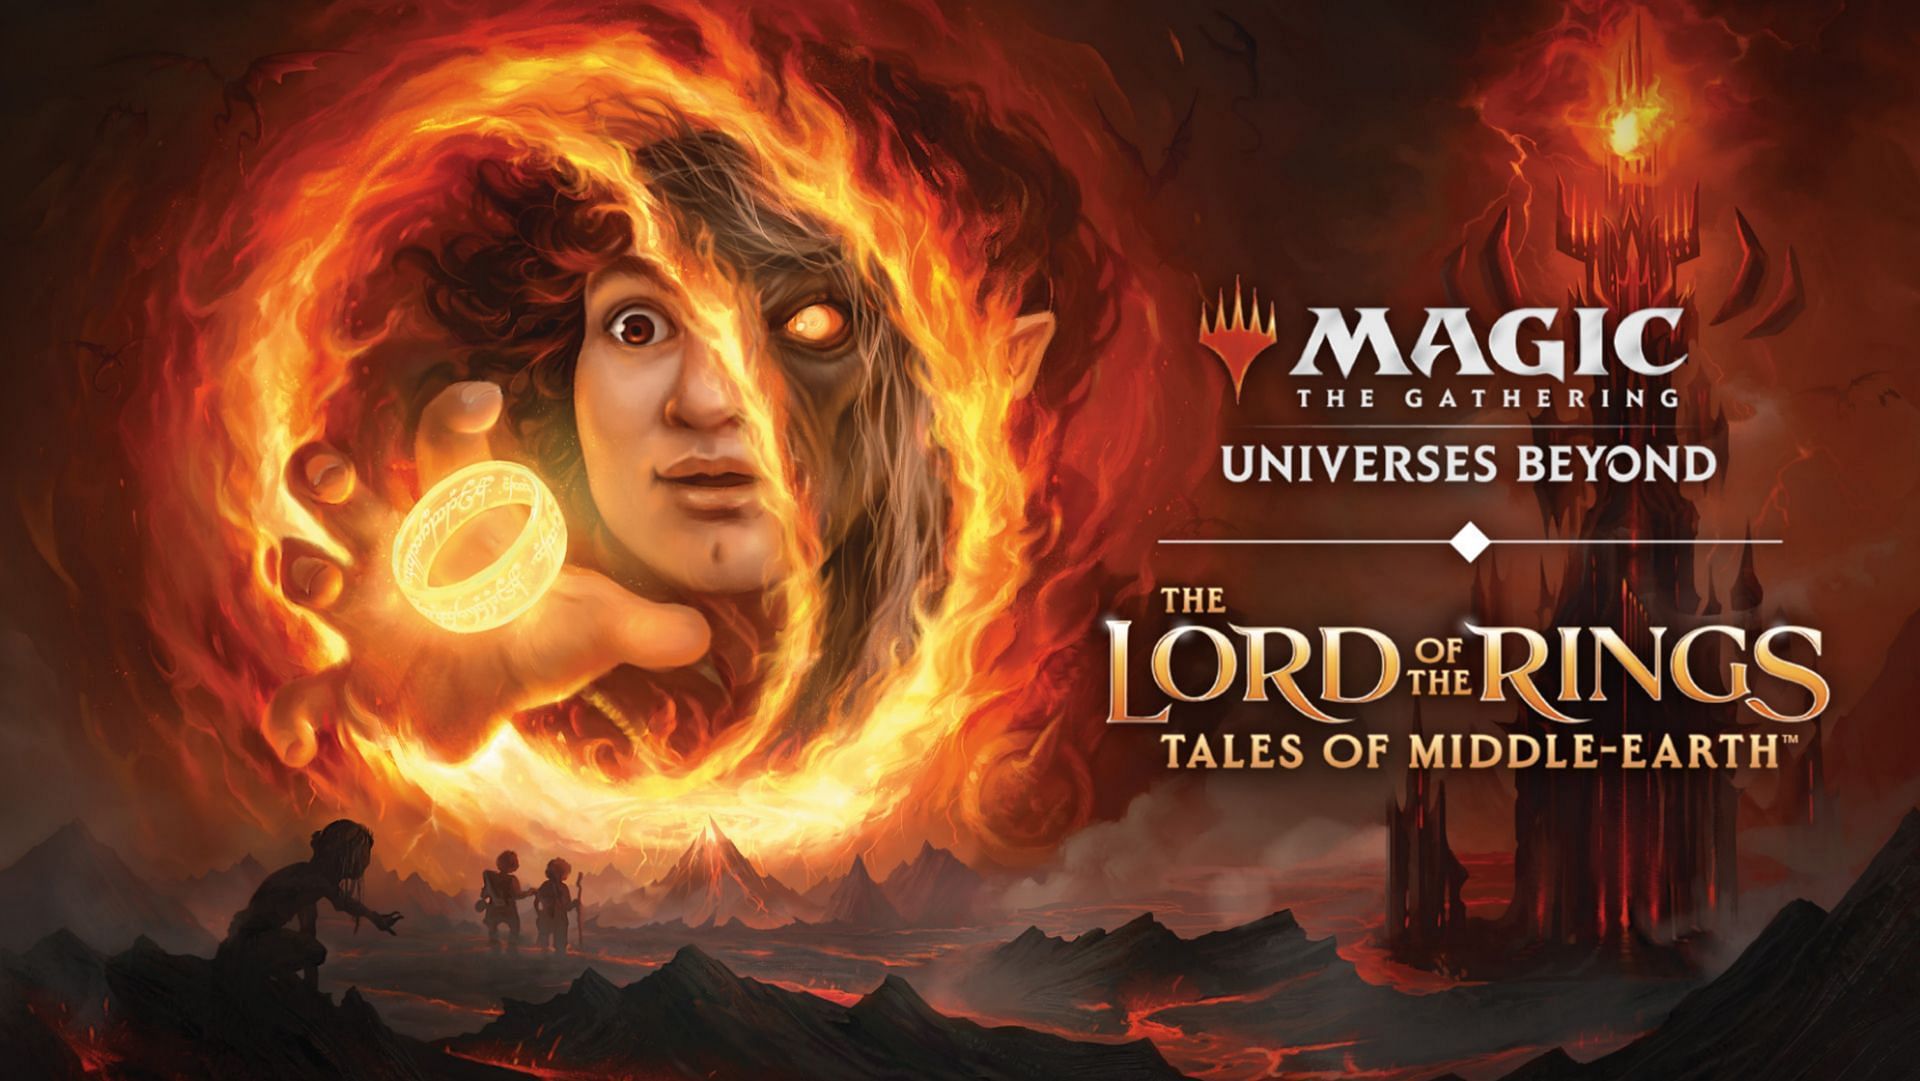 Lord of the Rings comes to Magic: The Gathering this year.